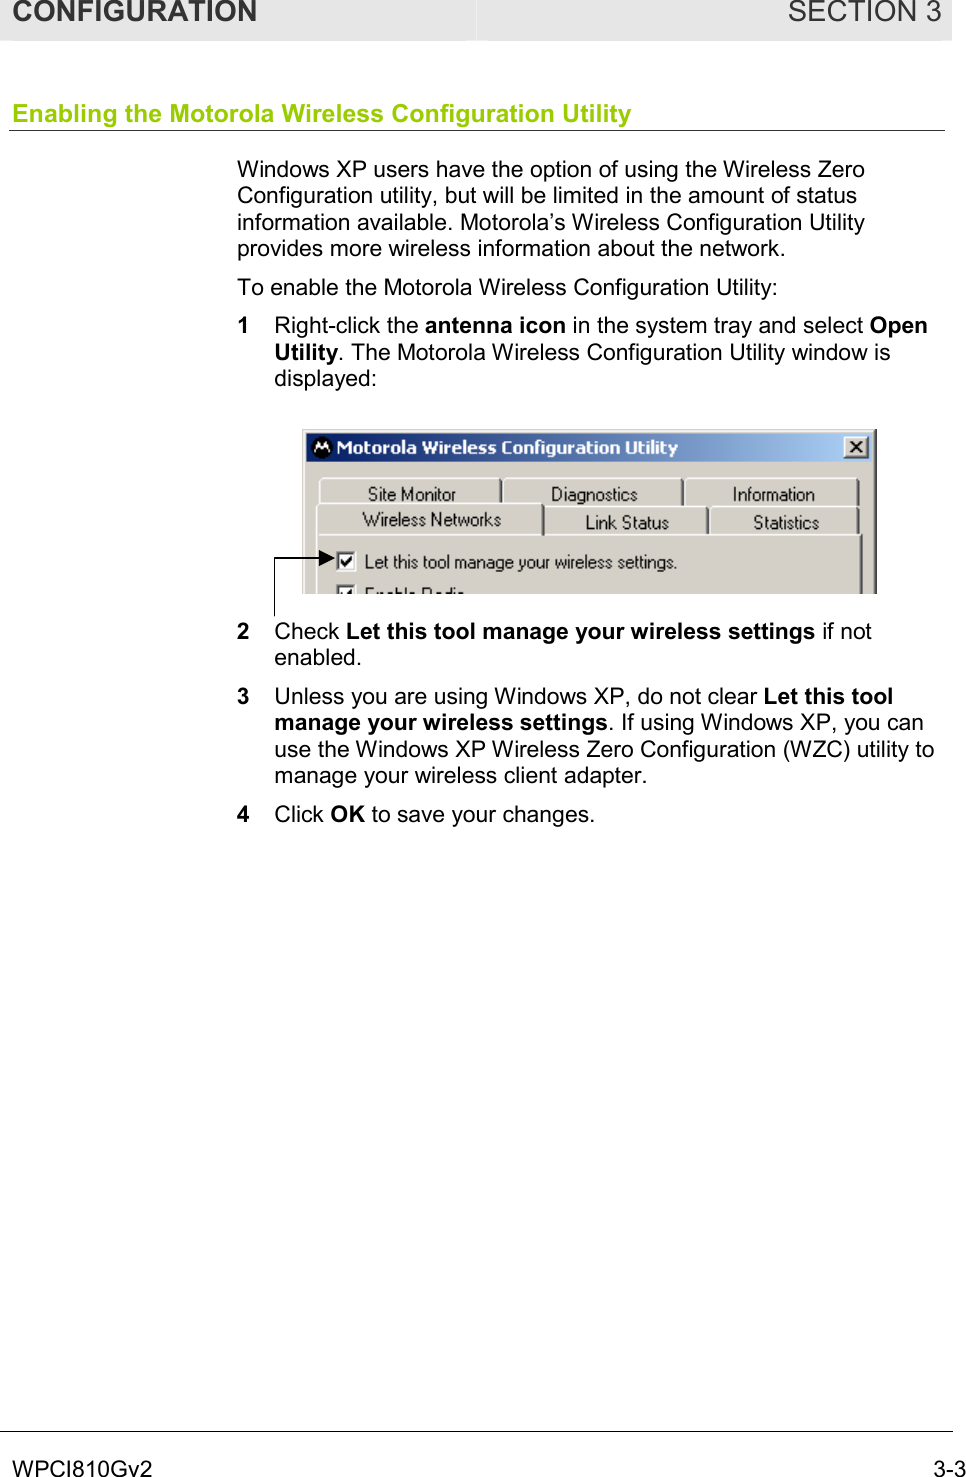 CONFIGURATION SECTION 3 WPCI810Gv2  3-3 Enabling the Motorola Wireless Configuration Utility Windows XP users have the option of using the Wireless Zero Configuration utility, but will be limited in the amount of status information available. Motorola’s Wireless Configuration Utility provides more wireless information about the network. To enable the Motorola Wireless Configuration Utility: 1  Right-click the antenna icon in the system tray and select Open Utility. The Motorola Wireless Configuration Utility window is displayed:  2  Check Let this tool manage your wireless settings if not enabled. 3  Unless you are using Windows XP, do not clear Let this tool manage your wireless settings. If using Windows XP, you can use the Windows XP Wireless Zero Configuration (WZC) utility to manage your wireless client adapter.  4  Click OK to save your changes. 